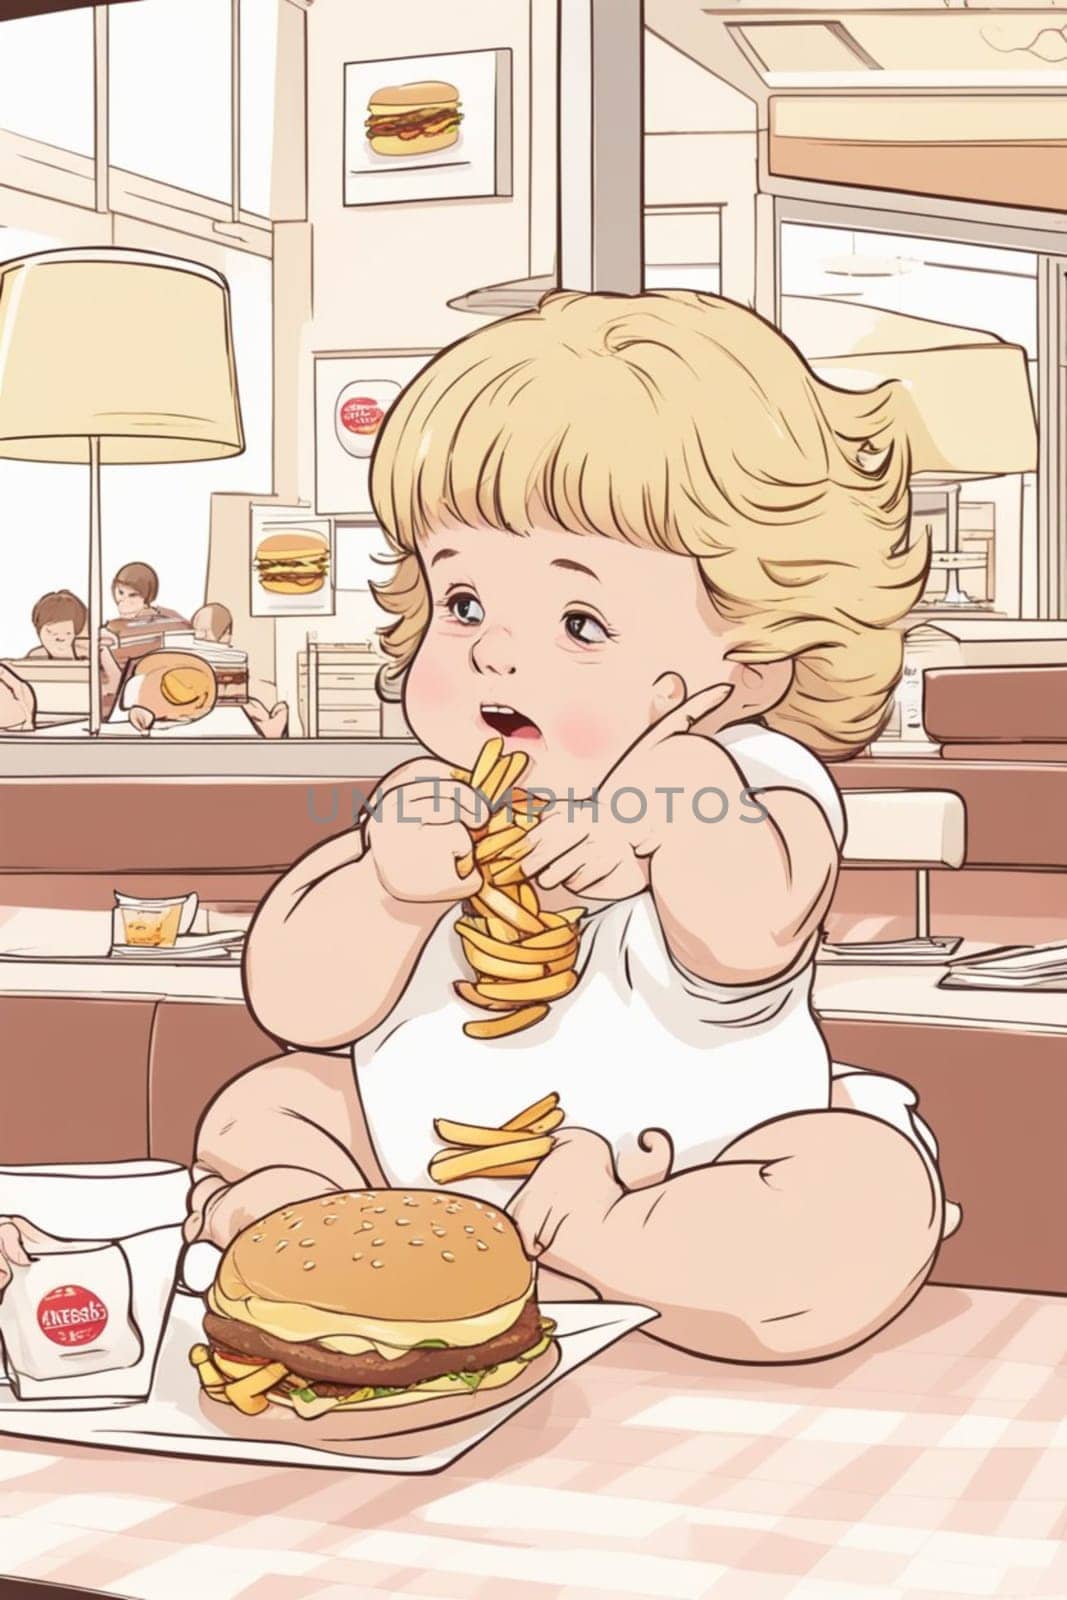 obese boy girl eating fast food , hamburger, french fries - unhealthy eating concept illustration generative ai art